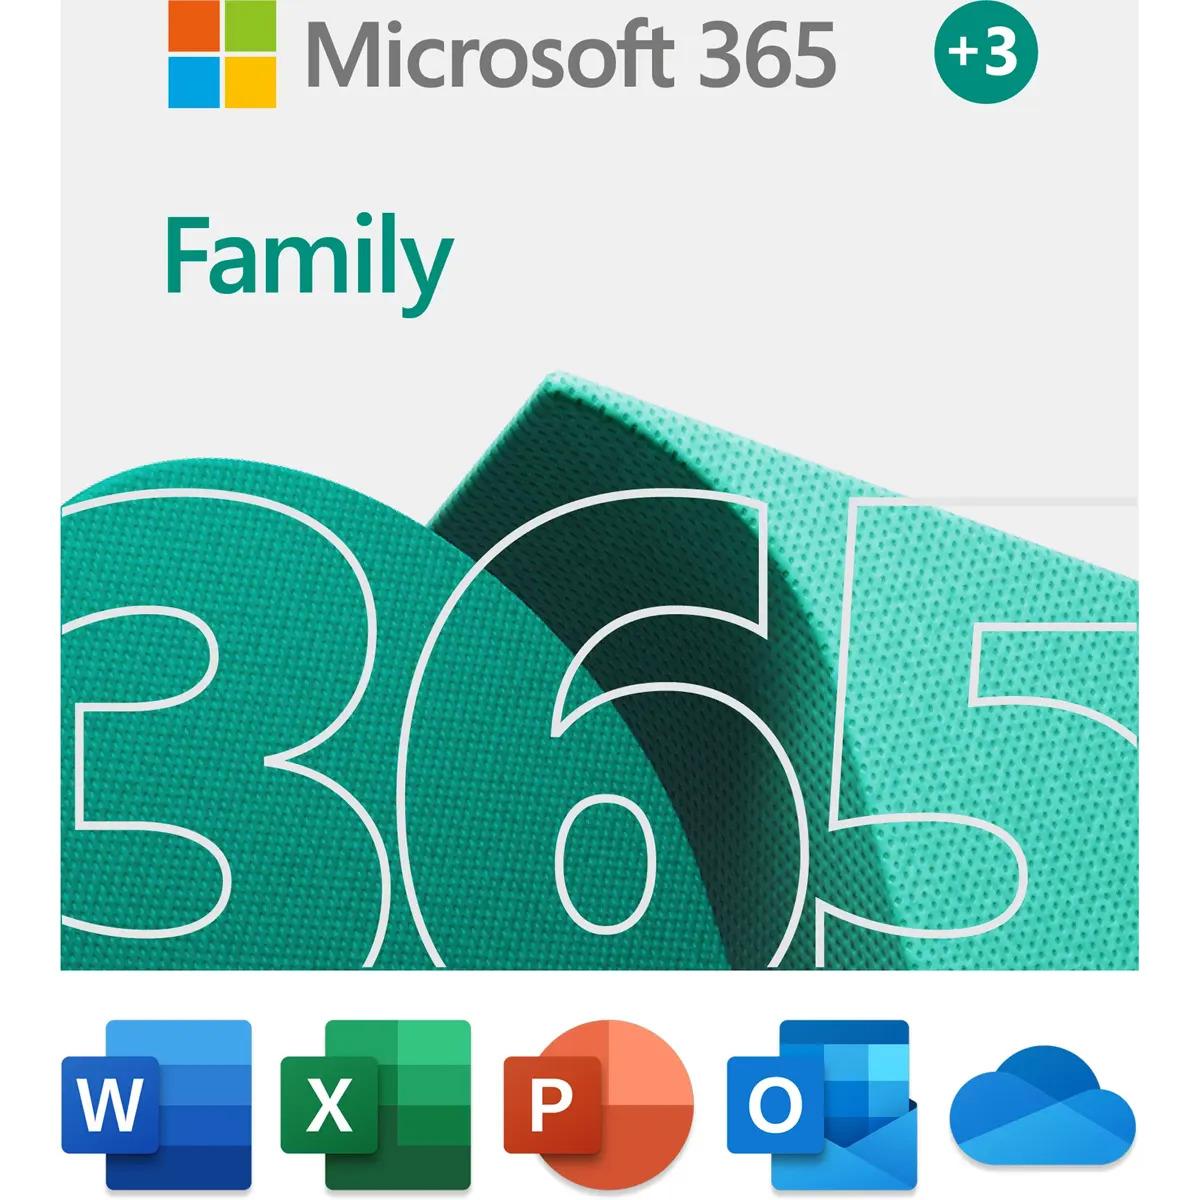 Microsoft 365 Family 15 Month Subscription for $69.98